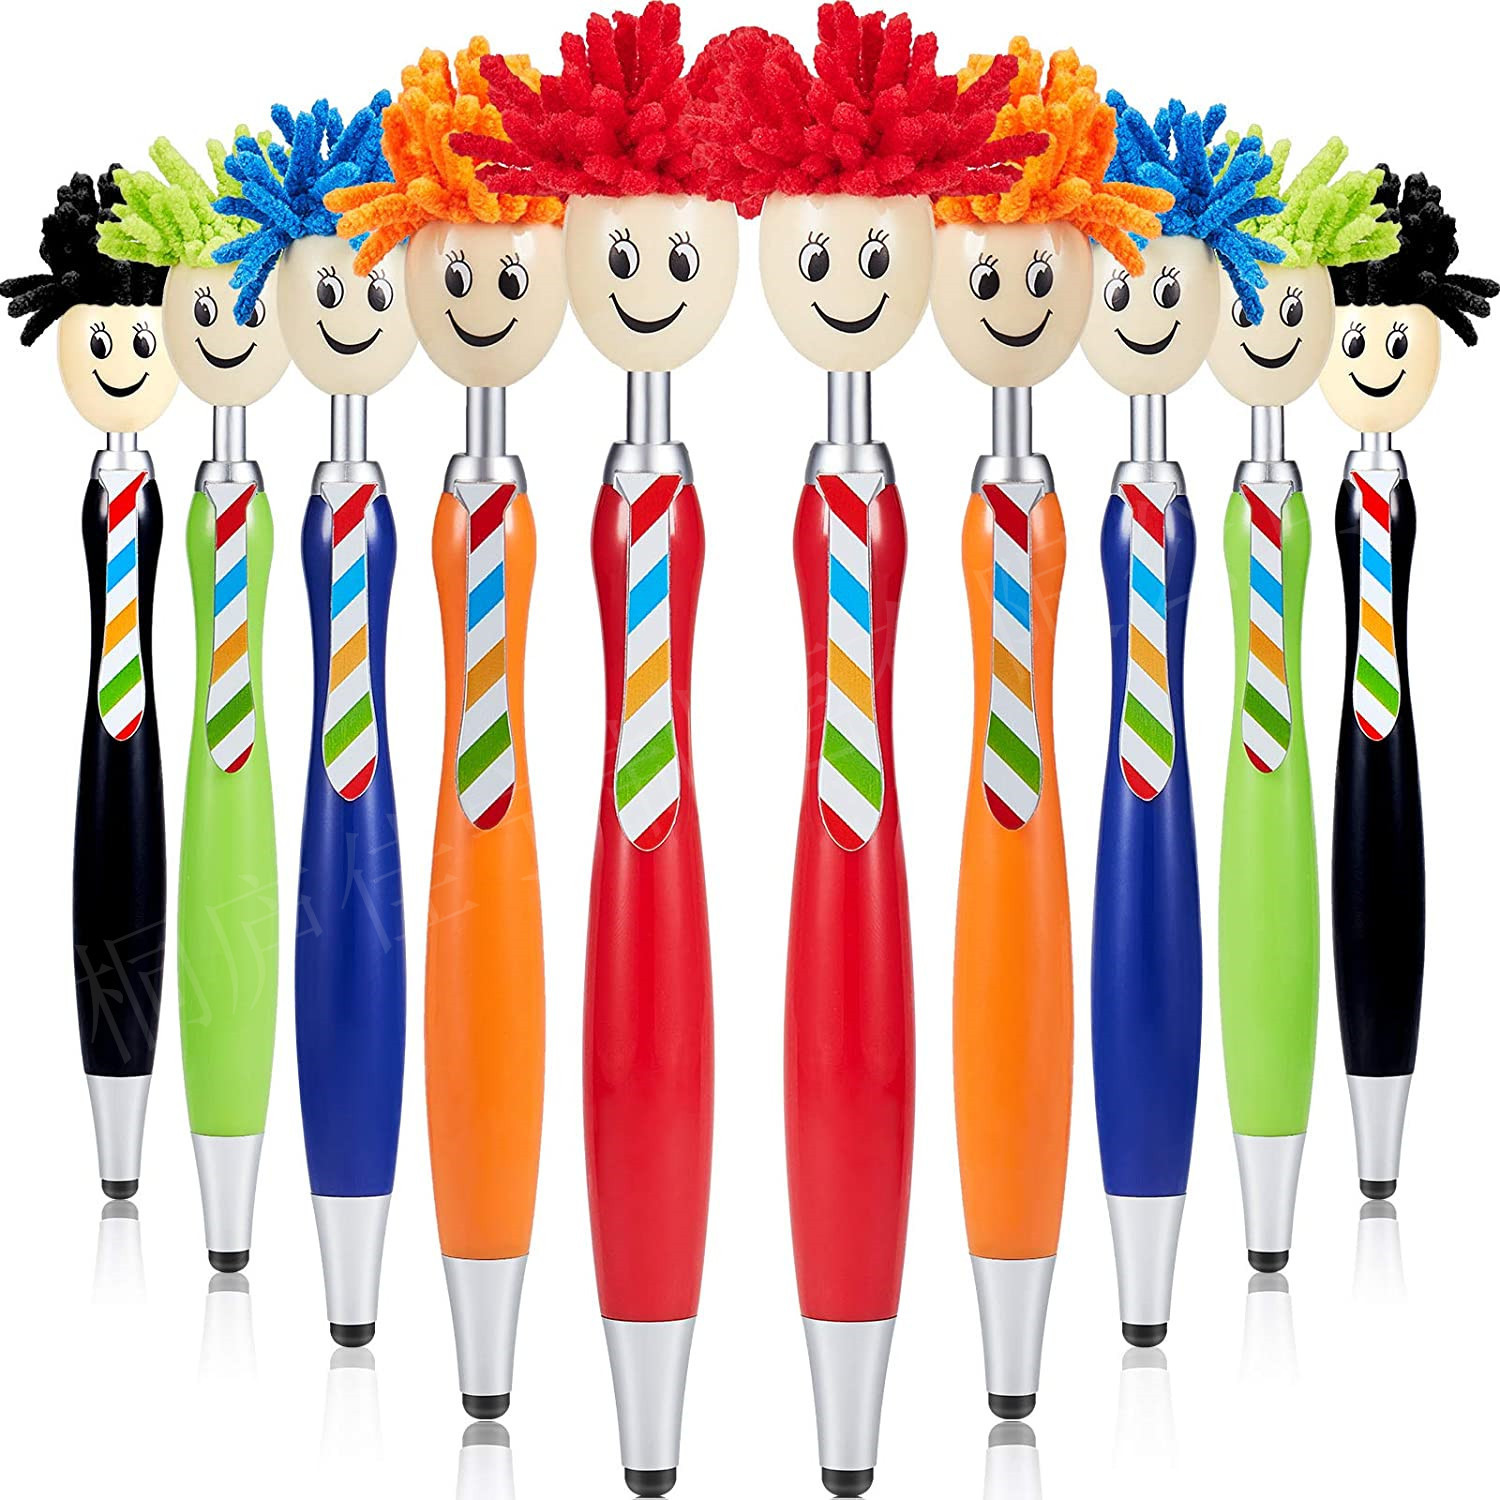 

1pc Cartoon Hairy Head Ballpoint Pen 2 In 1 Stylus Pen For School Office For Kids And Adults